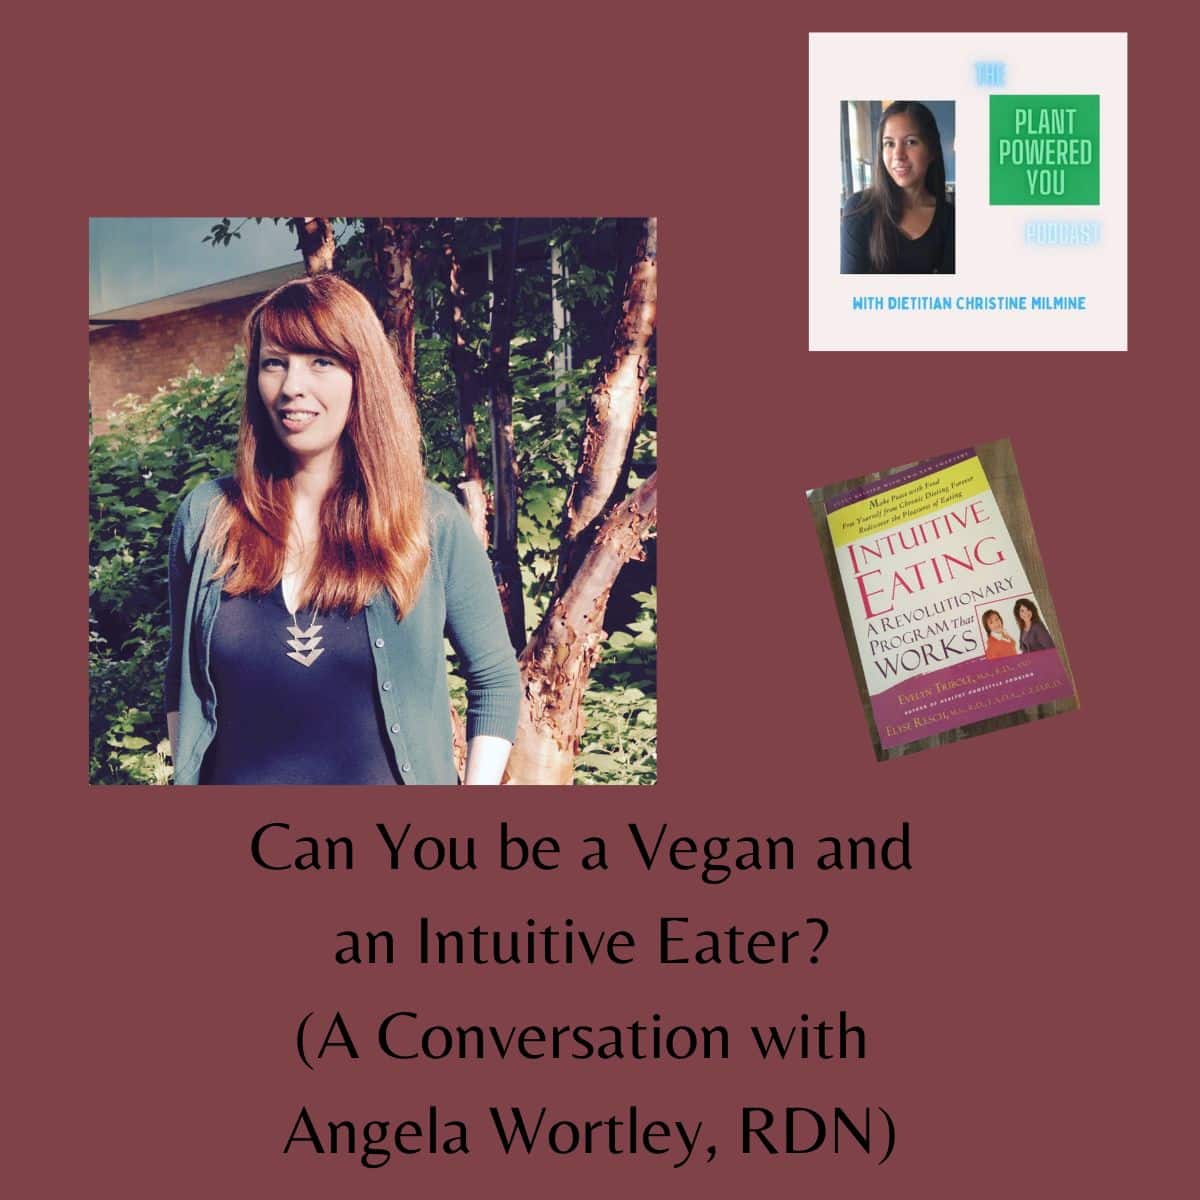 Can You be a Vegan and an Intuitive Eater With Angela Wortley, RDN-featured image (picture includes Angela Worley, the Intuitive Eating Book, and a picture of Christine.